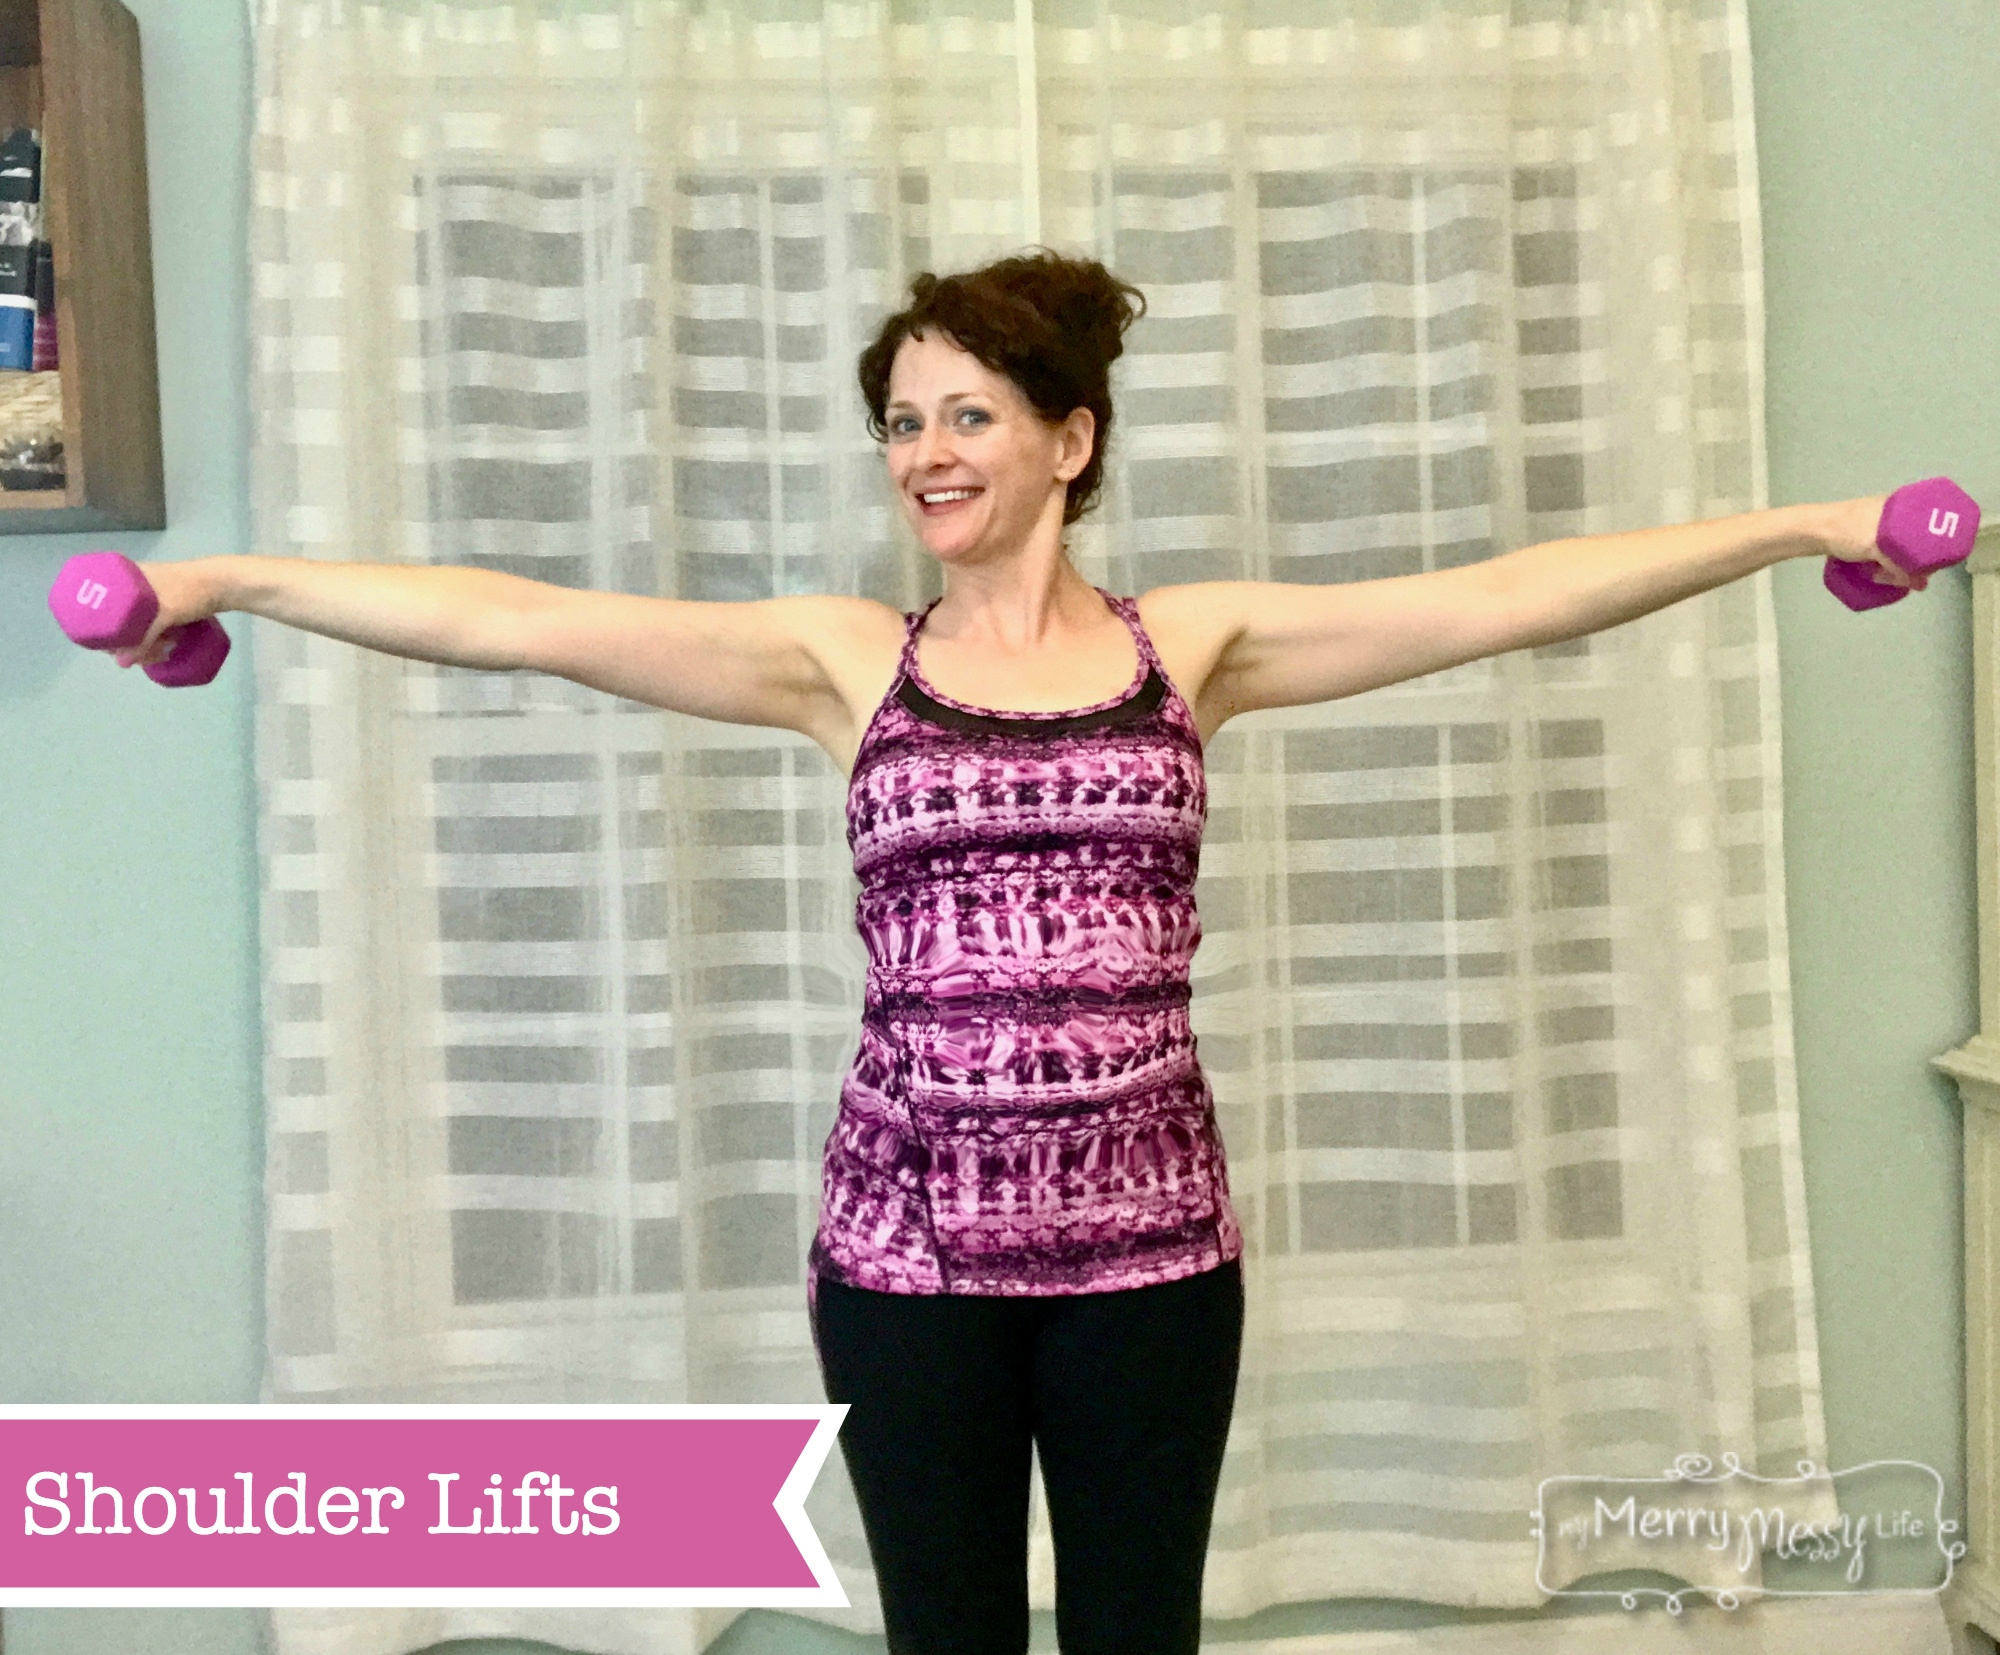 Upper Body Exercises - Shoulder Lifts - part of a 15 min arm routine that creates strong, sexy arms and back!